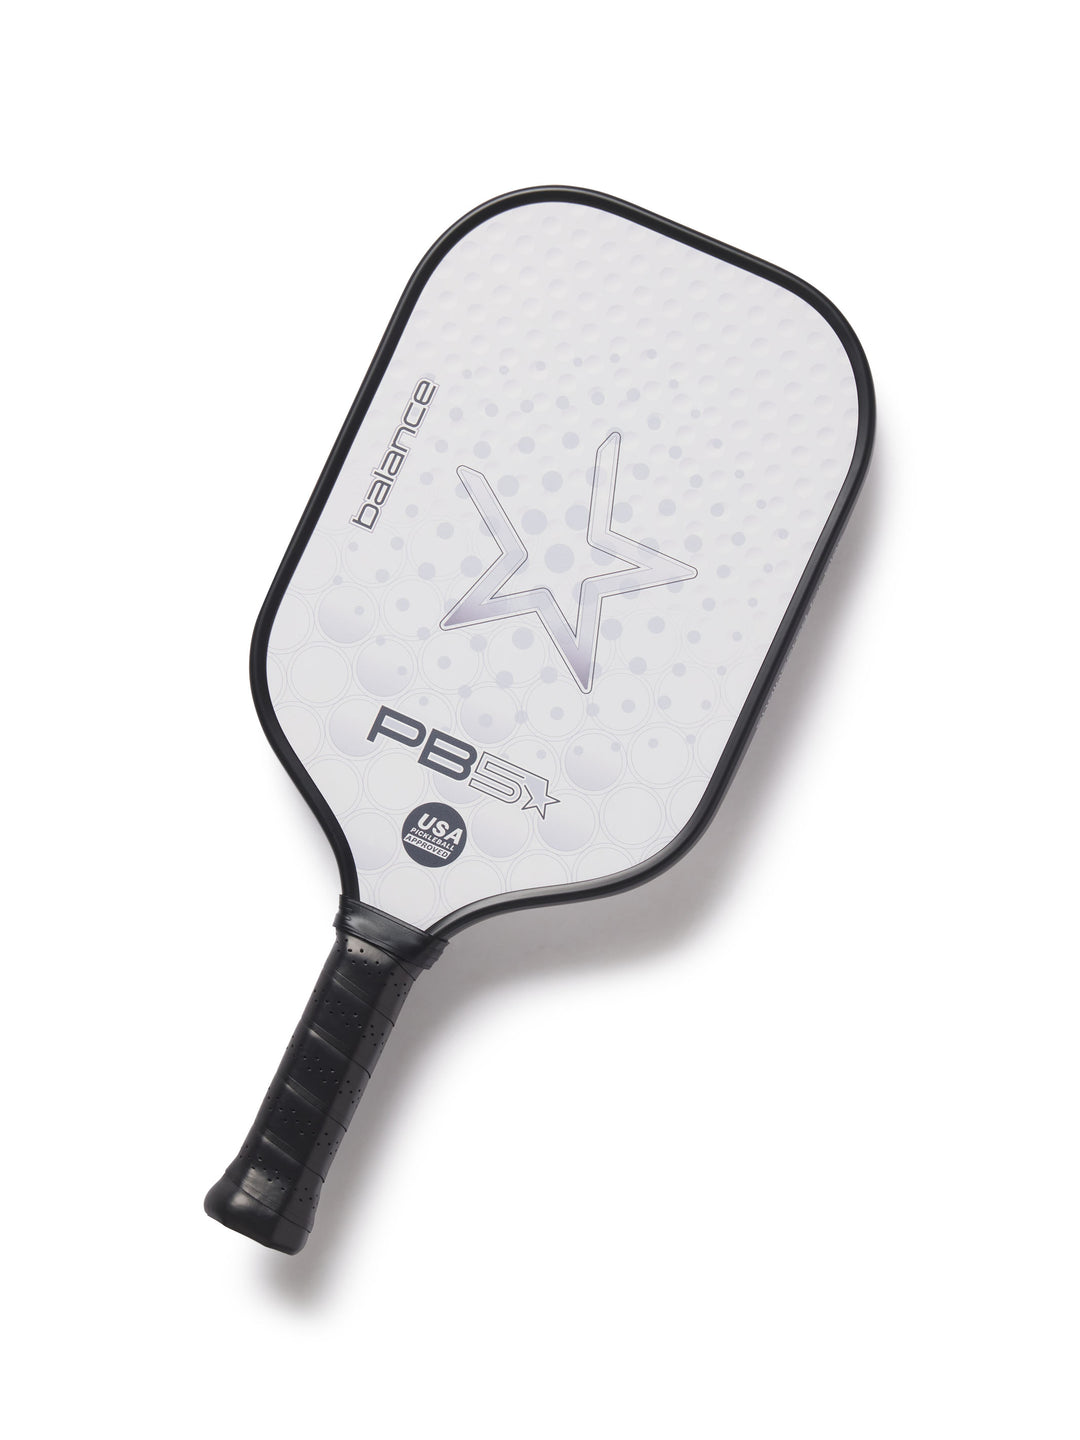 Balance Paddle full view in white with black edge guard and grip.